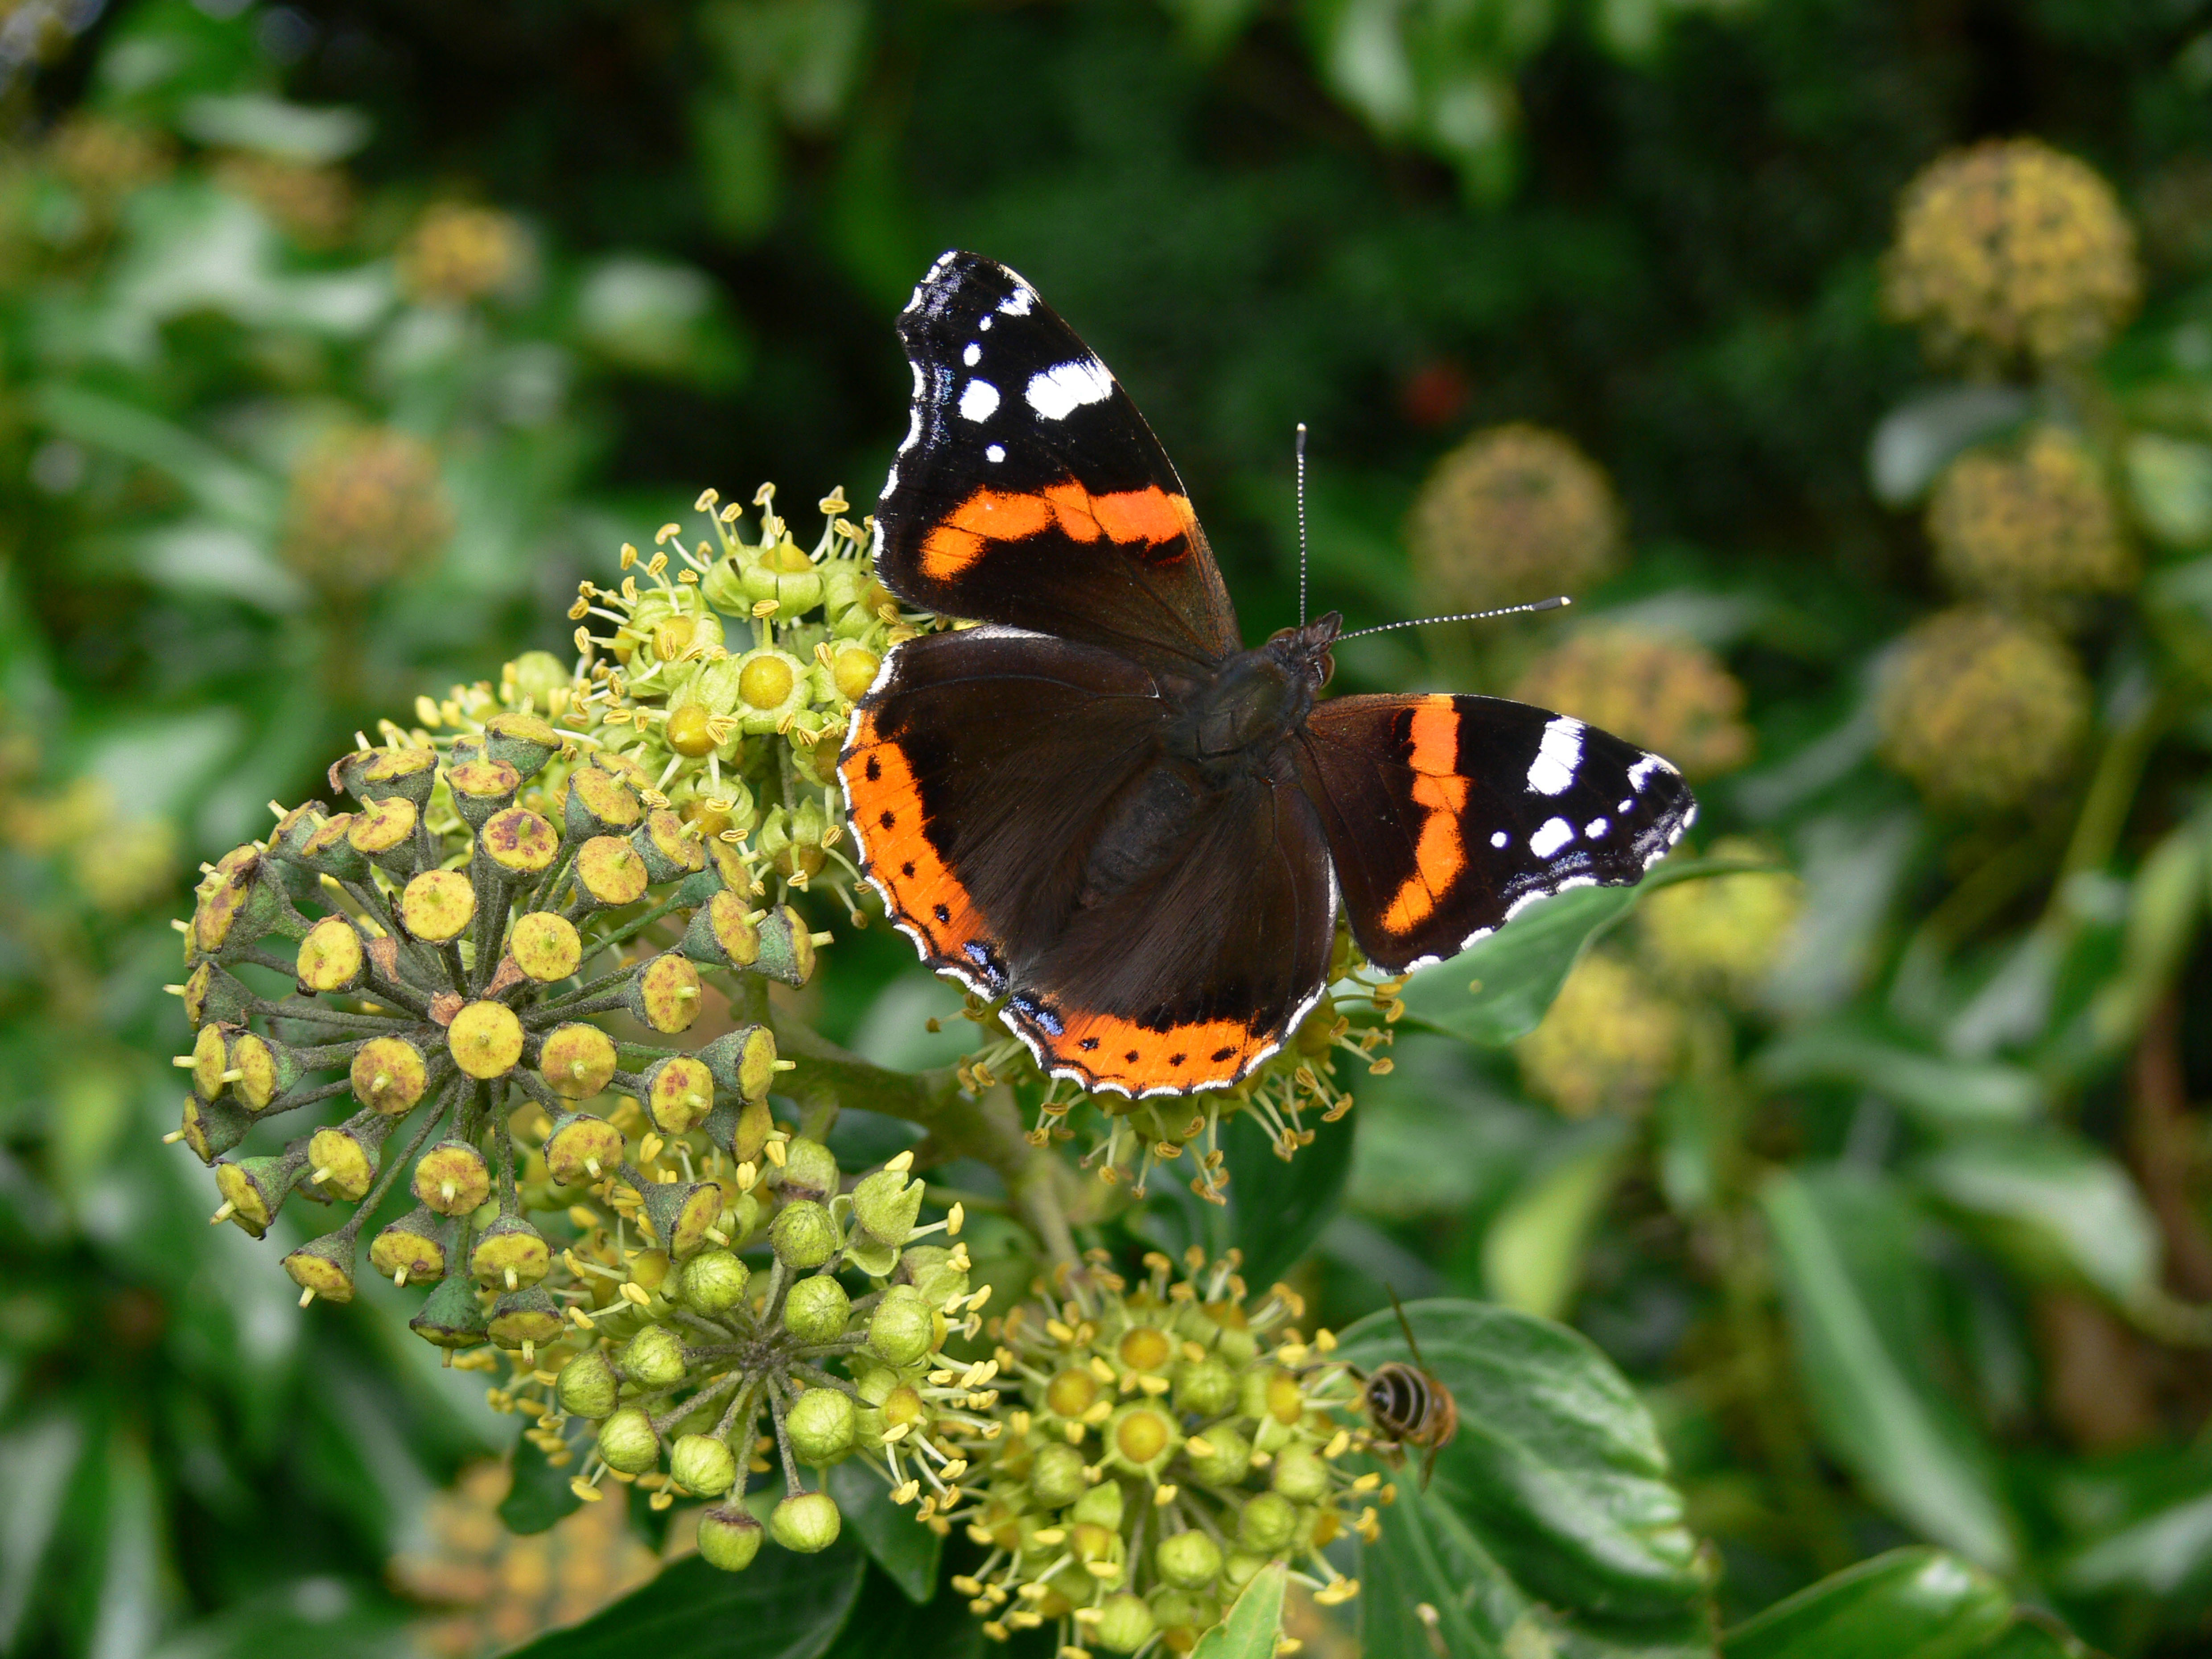 A red admiral butterfly feeding on ivy flowers (Alamy/PA)